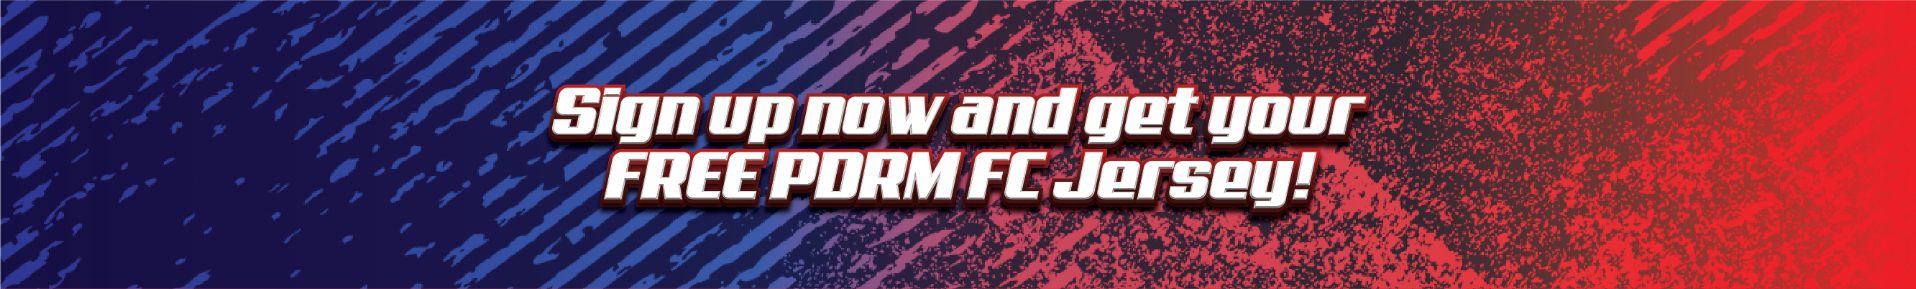 Signup redONE Postpaid FC40 Plan Free PDRM FC Jersey